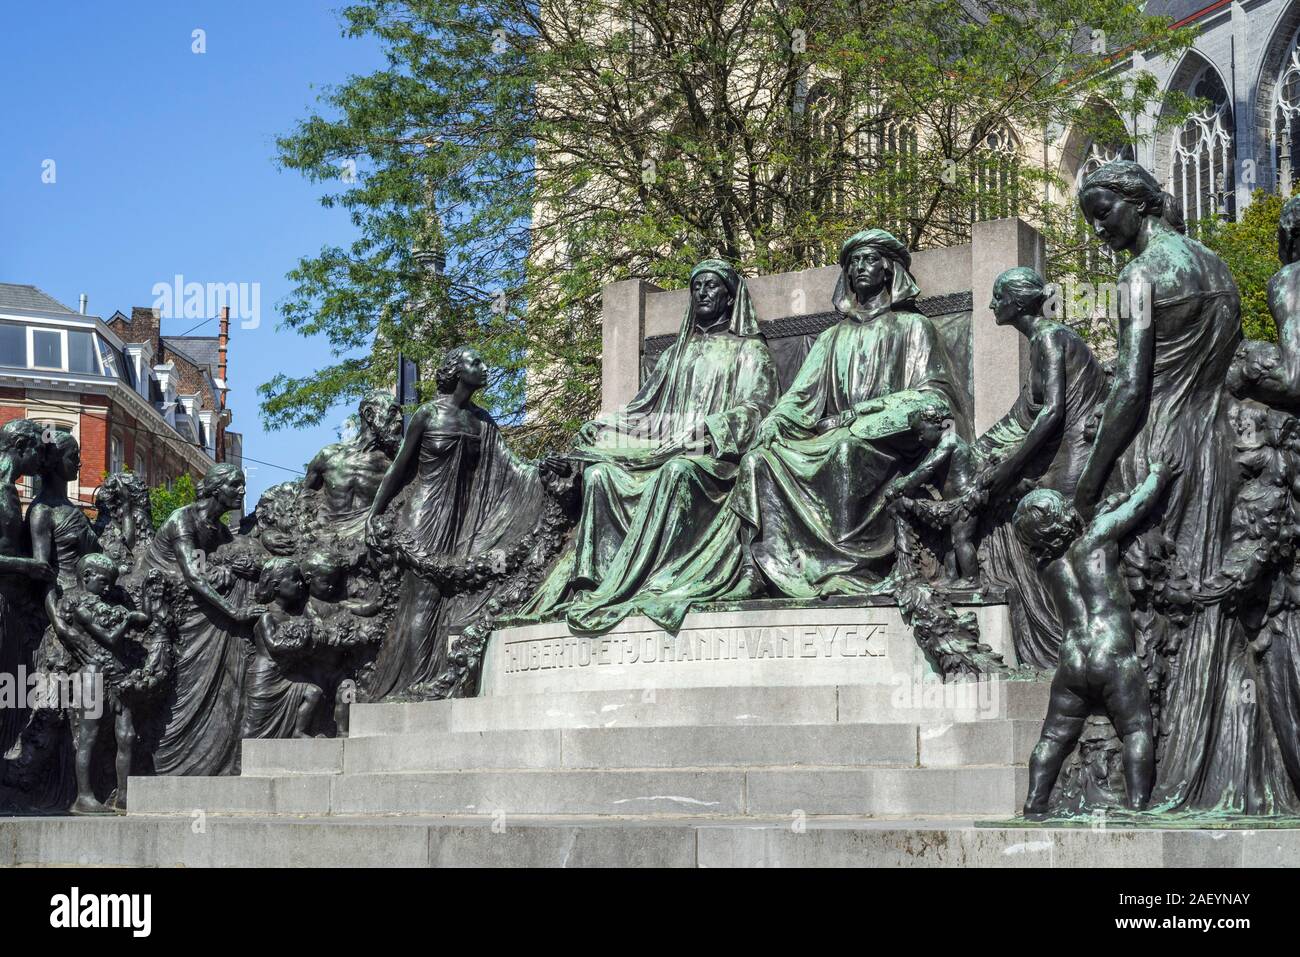 Monument in honour of the Van Eyck brothers, Jan and Hubert, painters of the Ghent Altarpiece / Adoration of the Mystic Lamb, Ghent, Flanders, Belgium Stock Photo